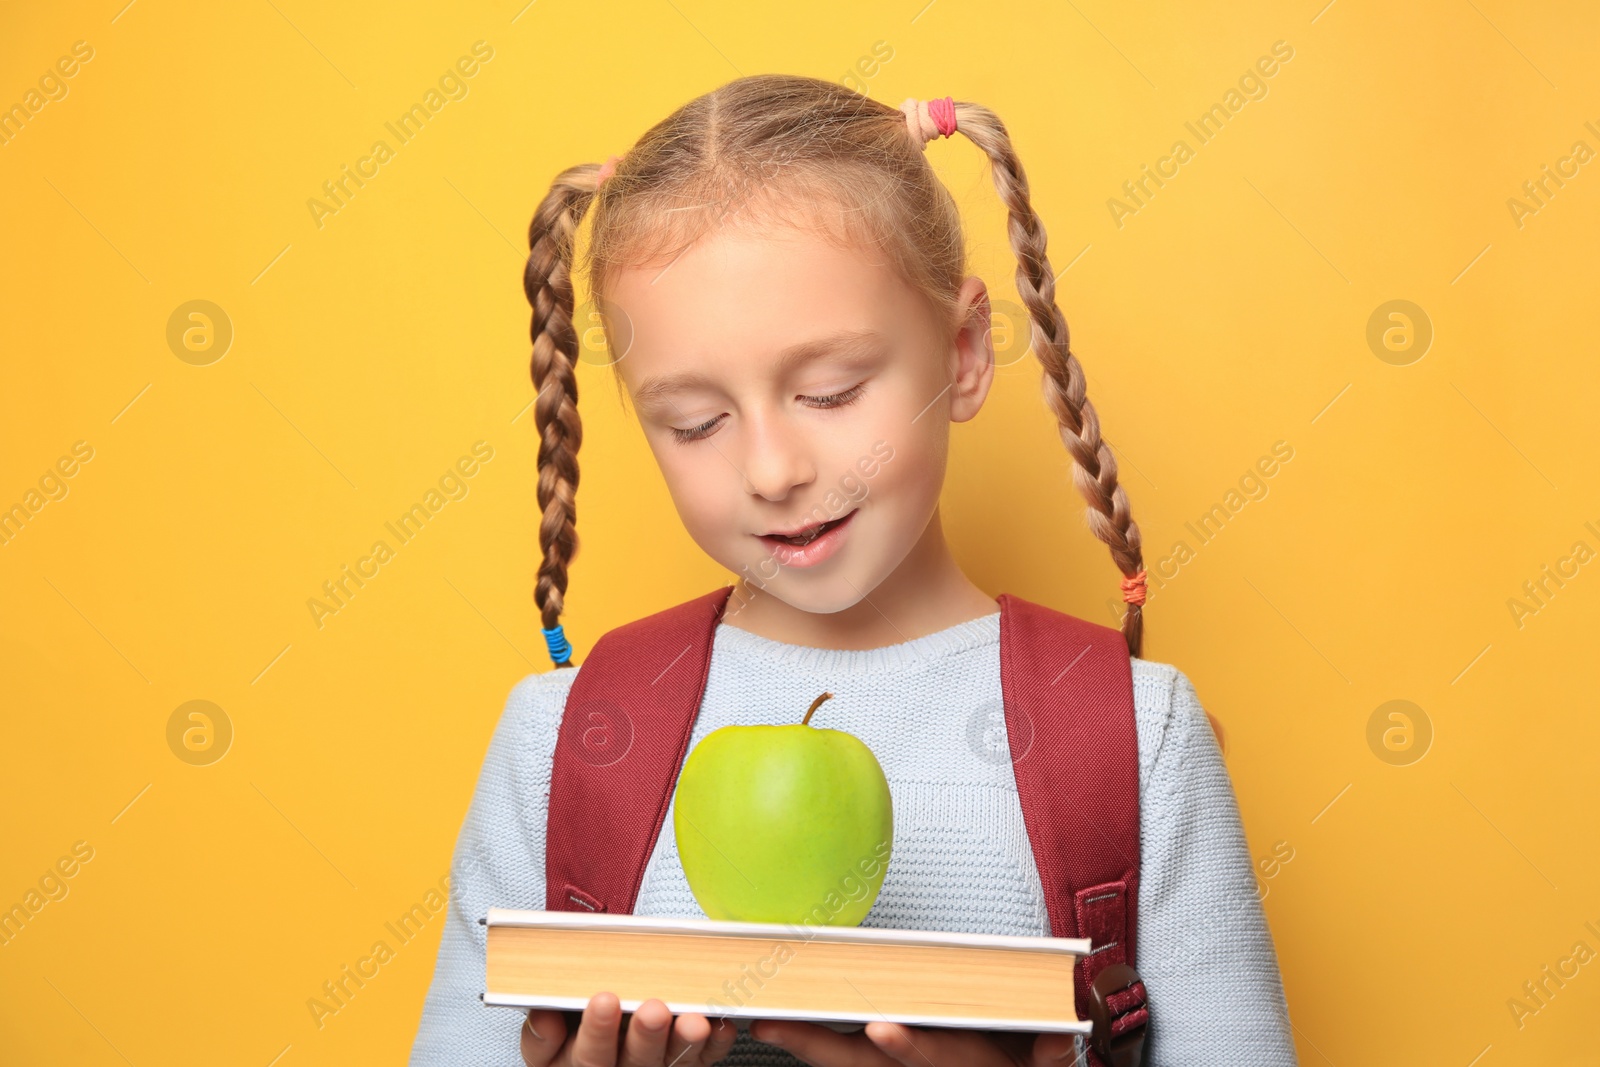 Photo of Cute little girl with apple, backpack and book on yellow background